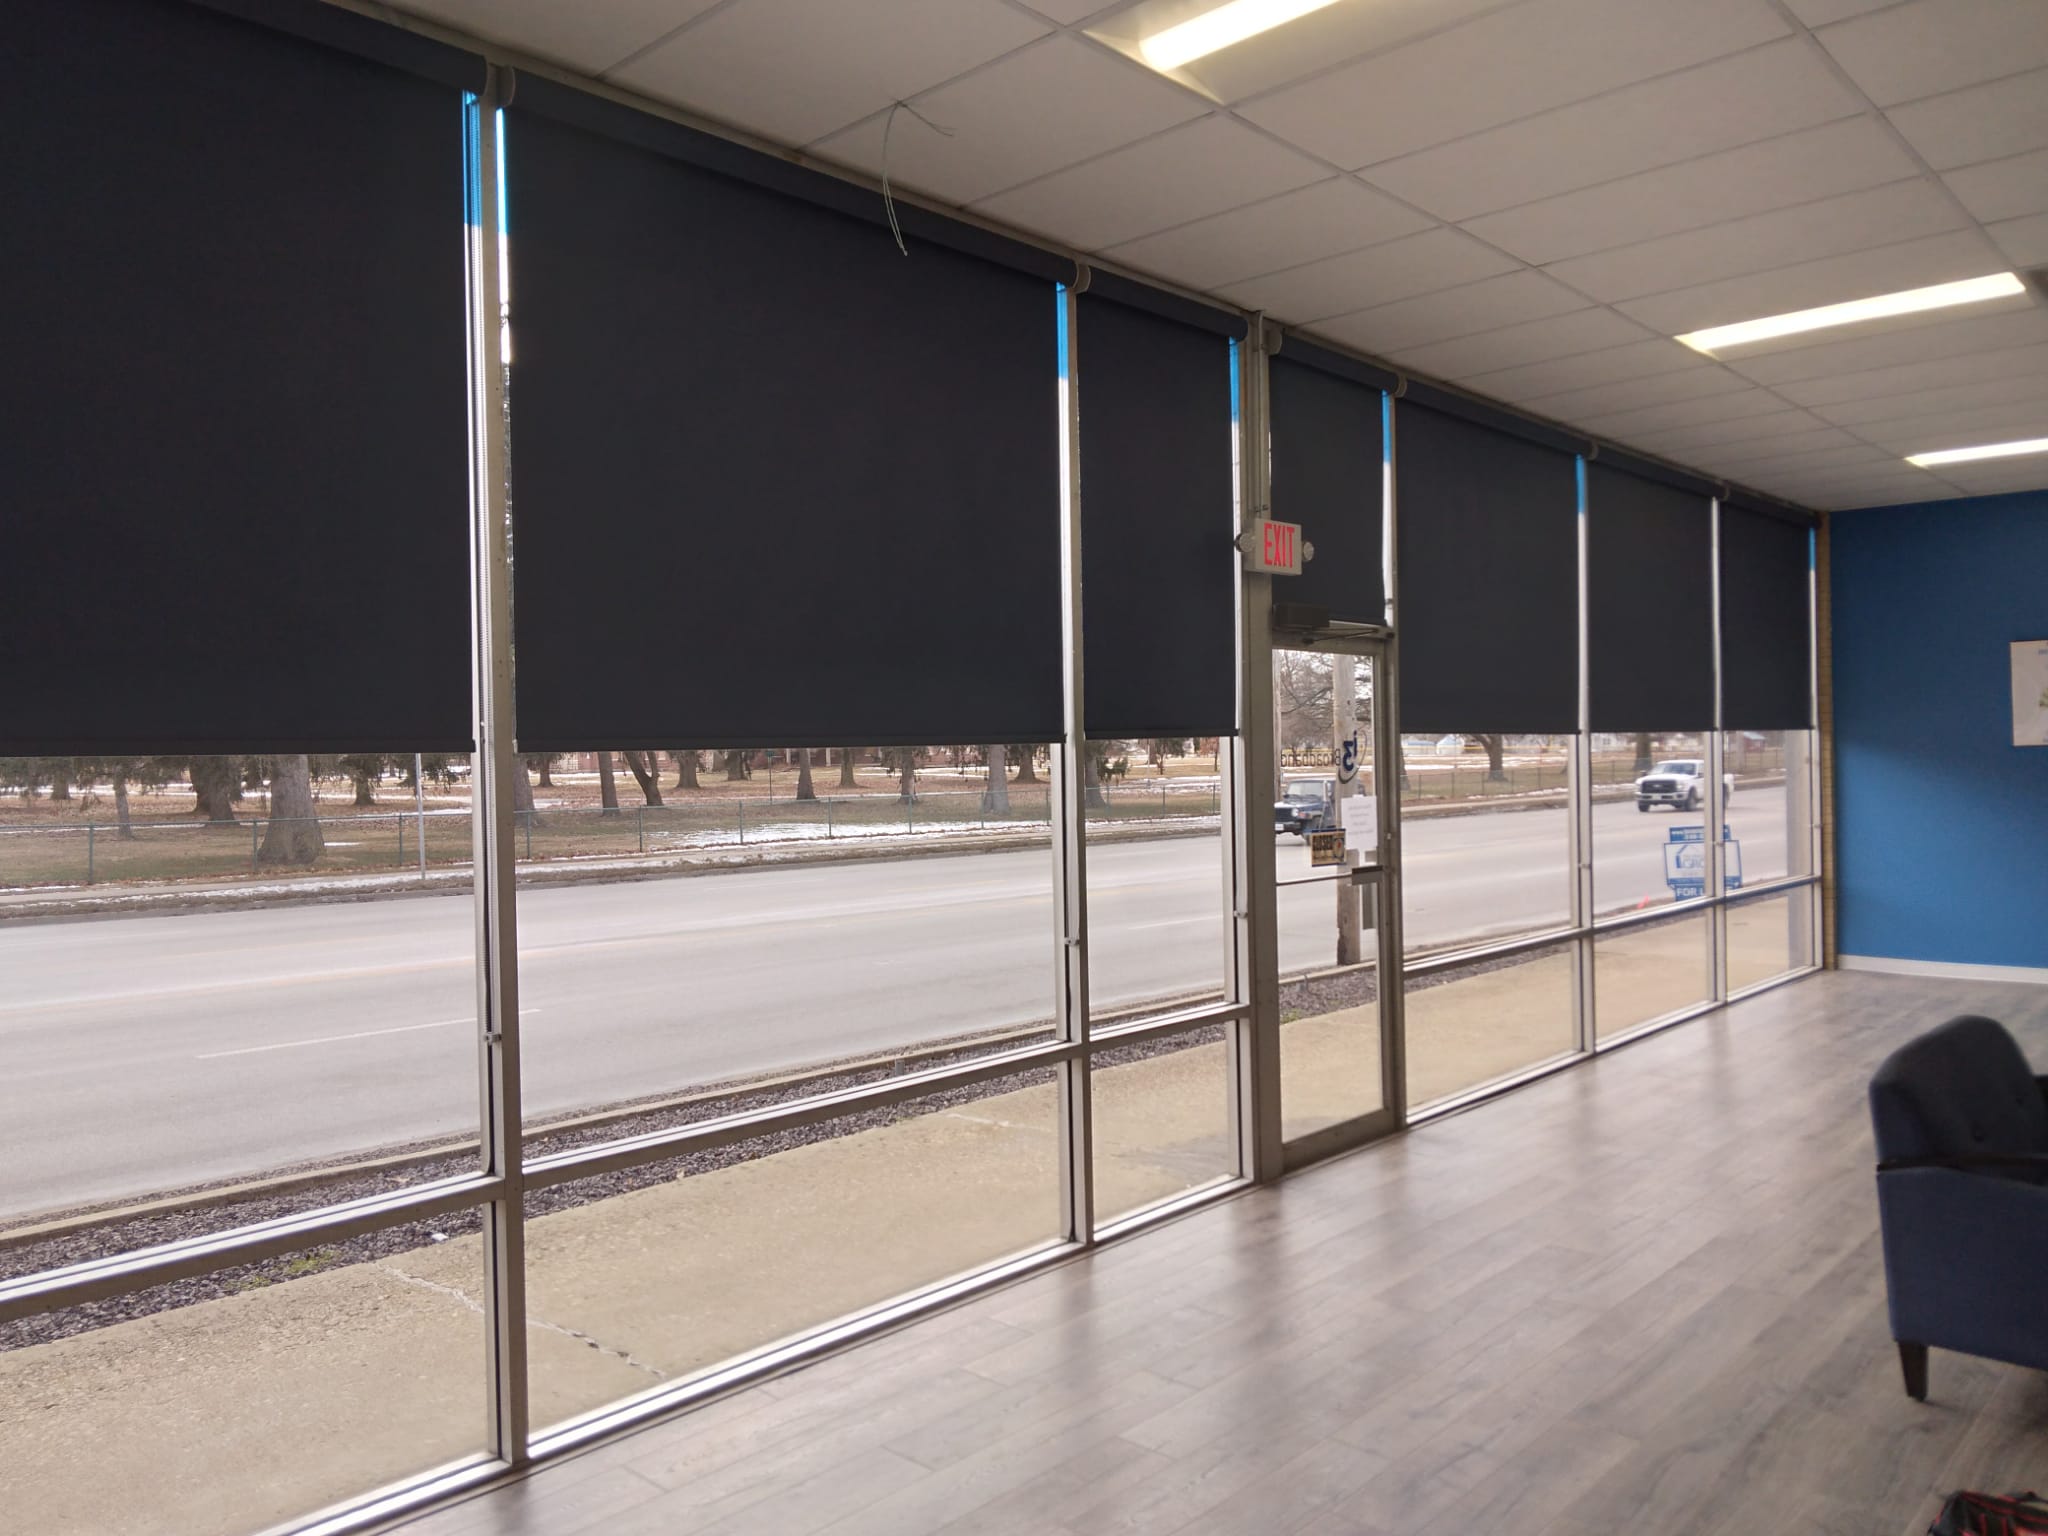 These roller shades look perfect in this Jacksonville Illinois storefront commercial setting.   BudgetBlinds  Blinds  Shades  WindowCoverings  SpringfieldIllinois  Springfield